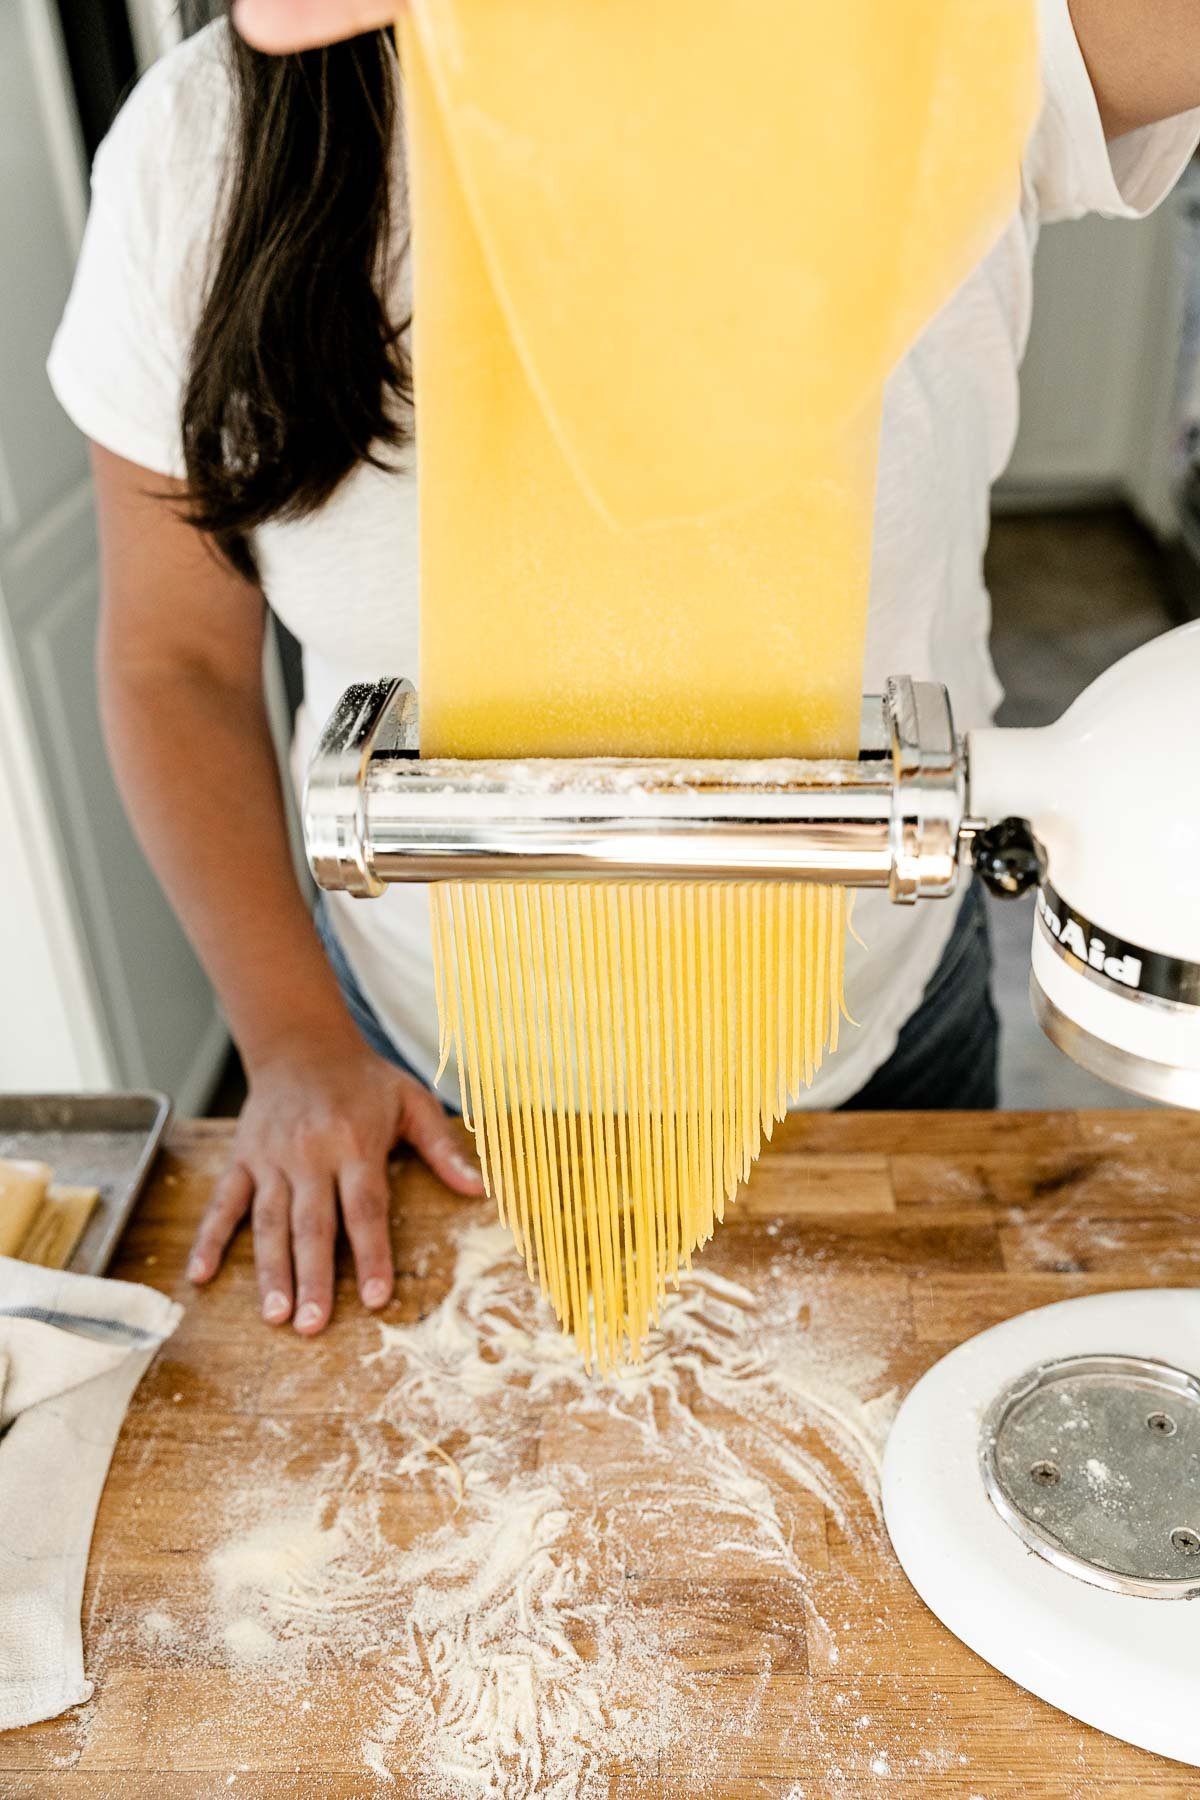 Jess of Plays Well With Butter feeds a large sheet of fresh pasta dough through a KitchenAid pasta cutting attachment connected to a Stand Mixer. As the pasta dough is fed through the cutter, the dough is cut into single strands of spaghetti. The Stand Mixer rests atop a butcher block countertop. The countertop has been lightly dusted with flour and an aluminum baking sheet also sits on top of the countertop and is covered by a kitchen towel.